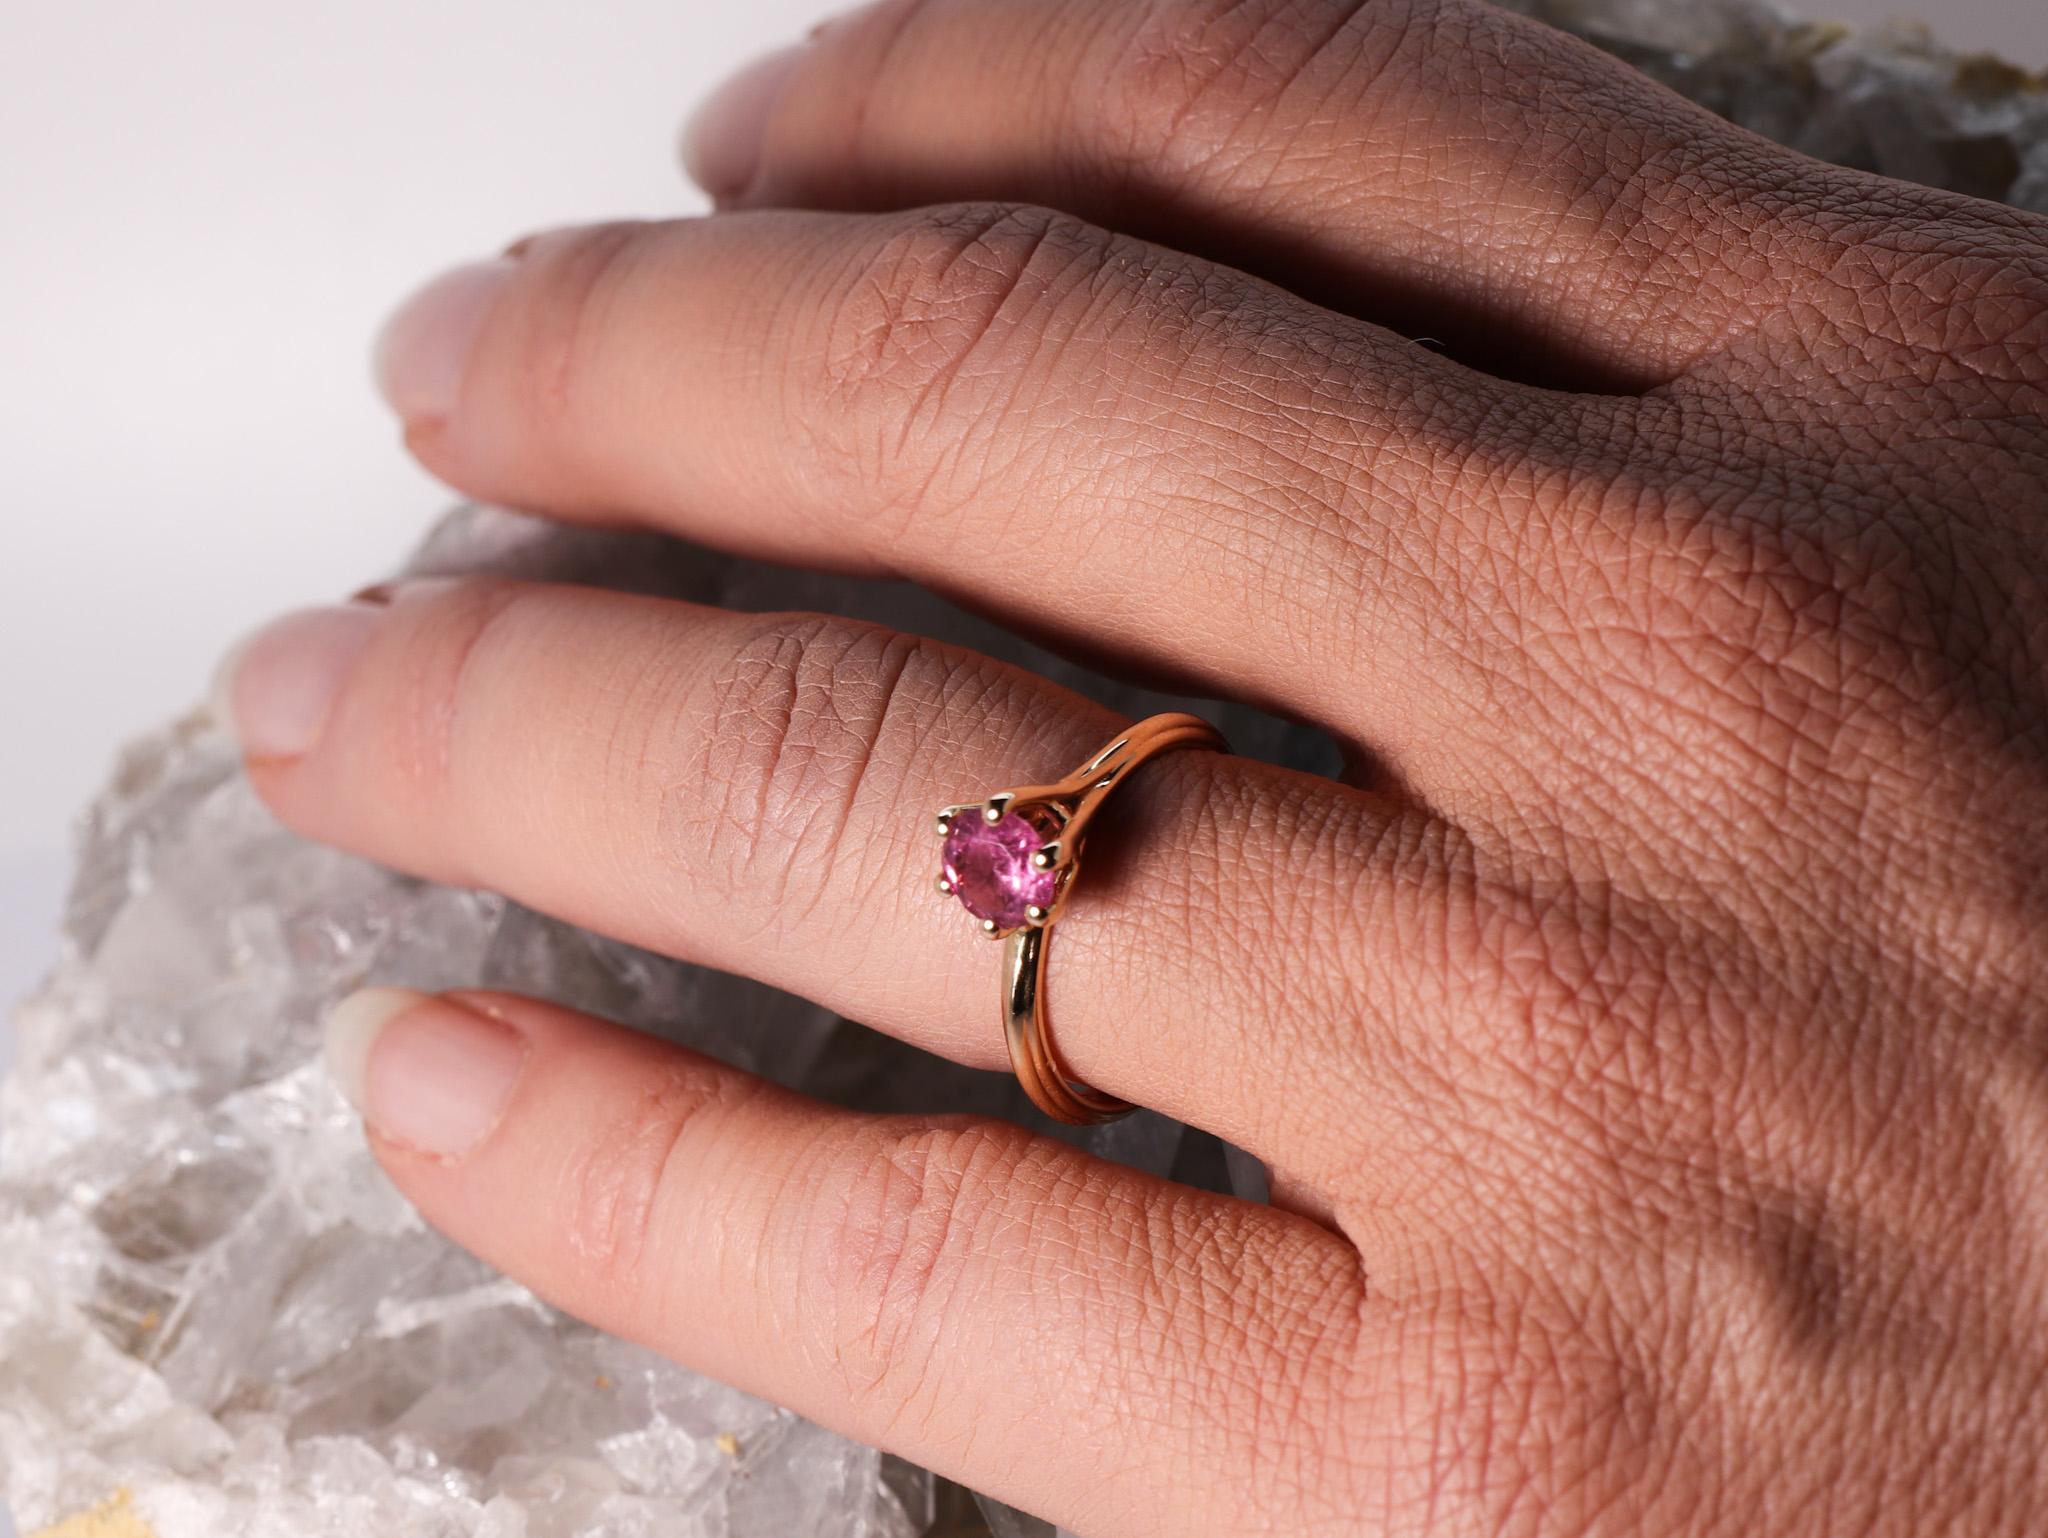 18K Rose Gold Asymmetric Cosmic Design Stackable Pink Tourmaline Cocktail  Ring.
The Egle ring is made of 18 karat rose gold and features a round mixed cut natural pink tourmaline around 0.8 carats, diameter 5.9 mm. The total weight of the ring is